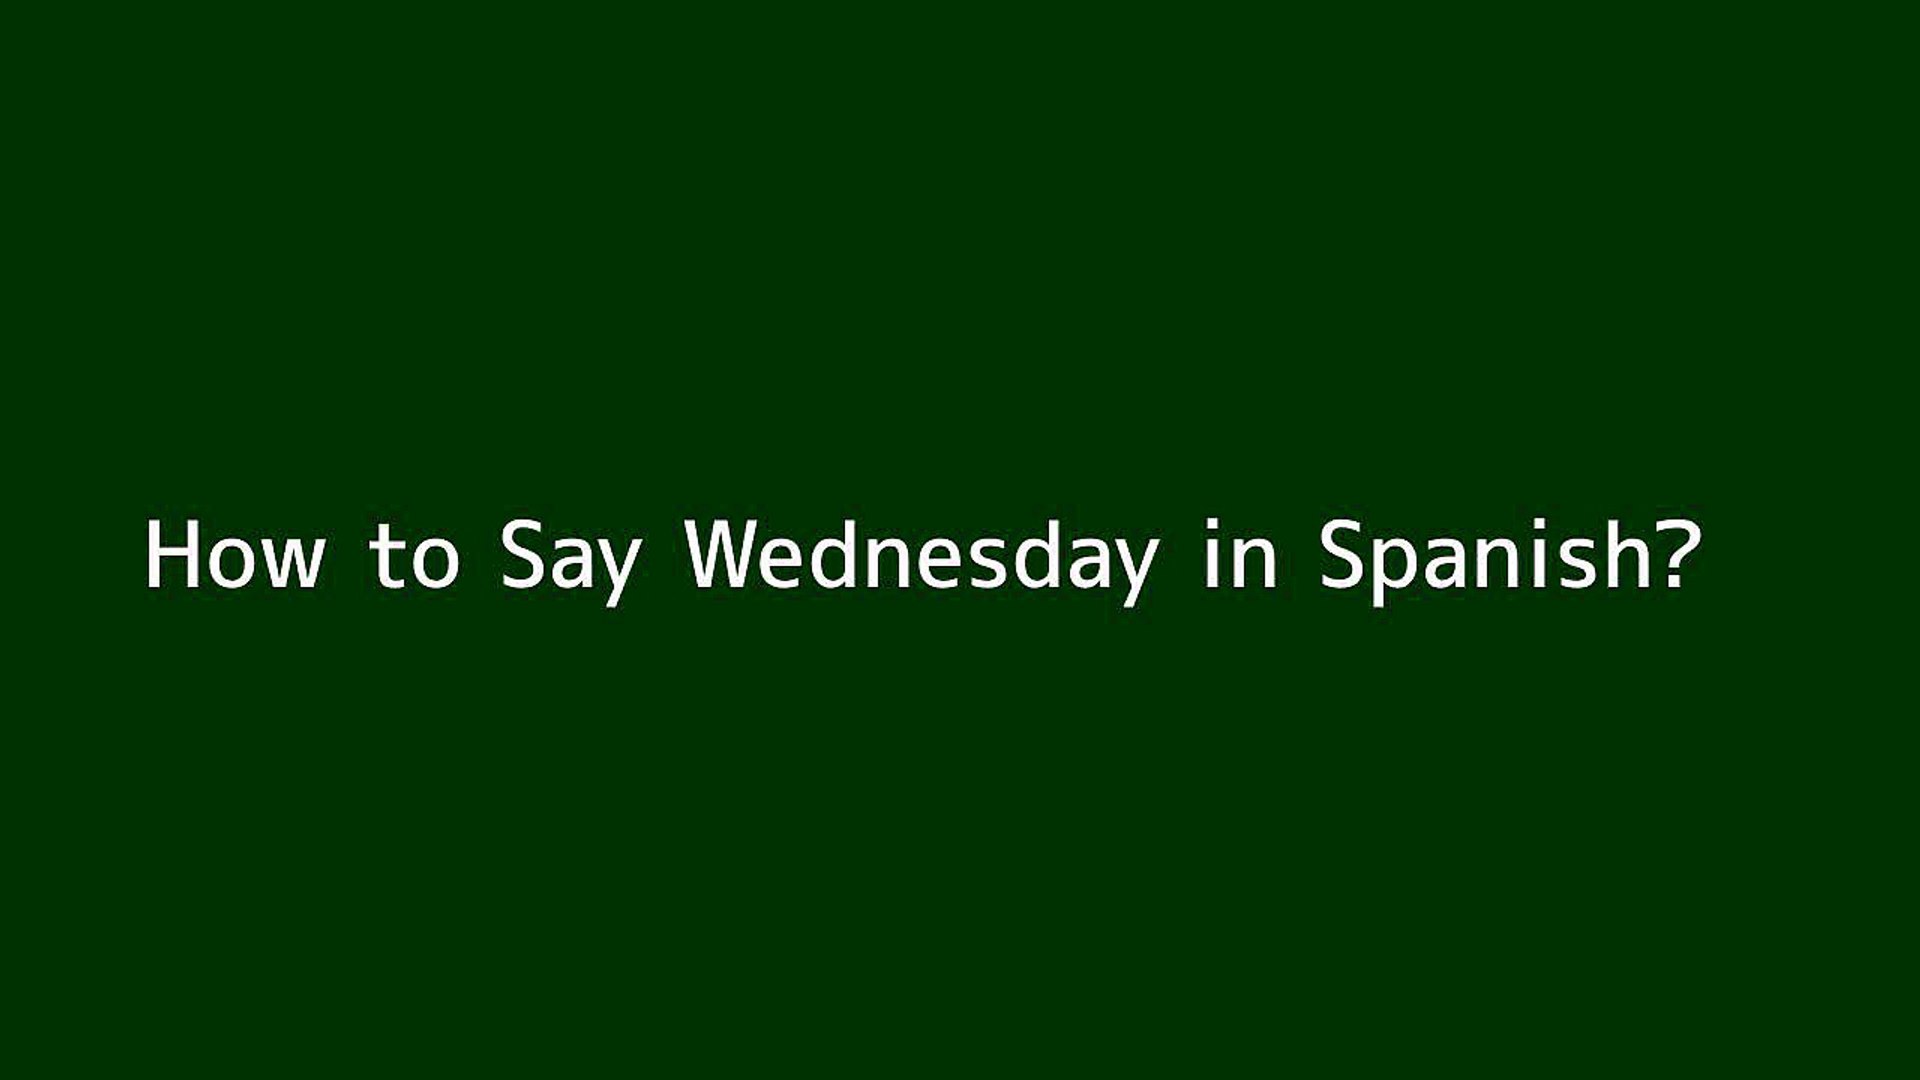 How to say Wednesday in Spanish - Vidéo Dailymotion